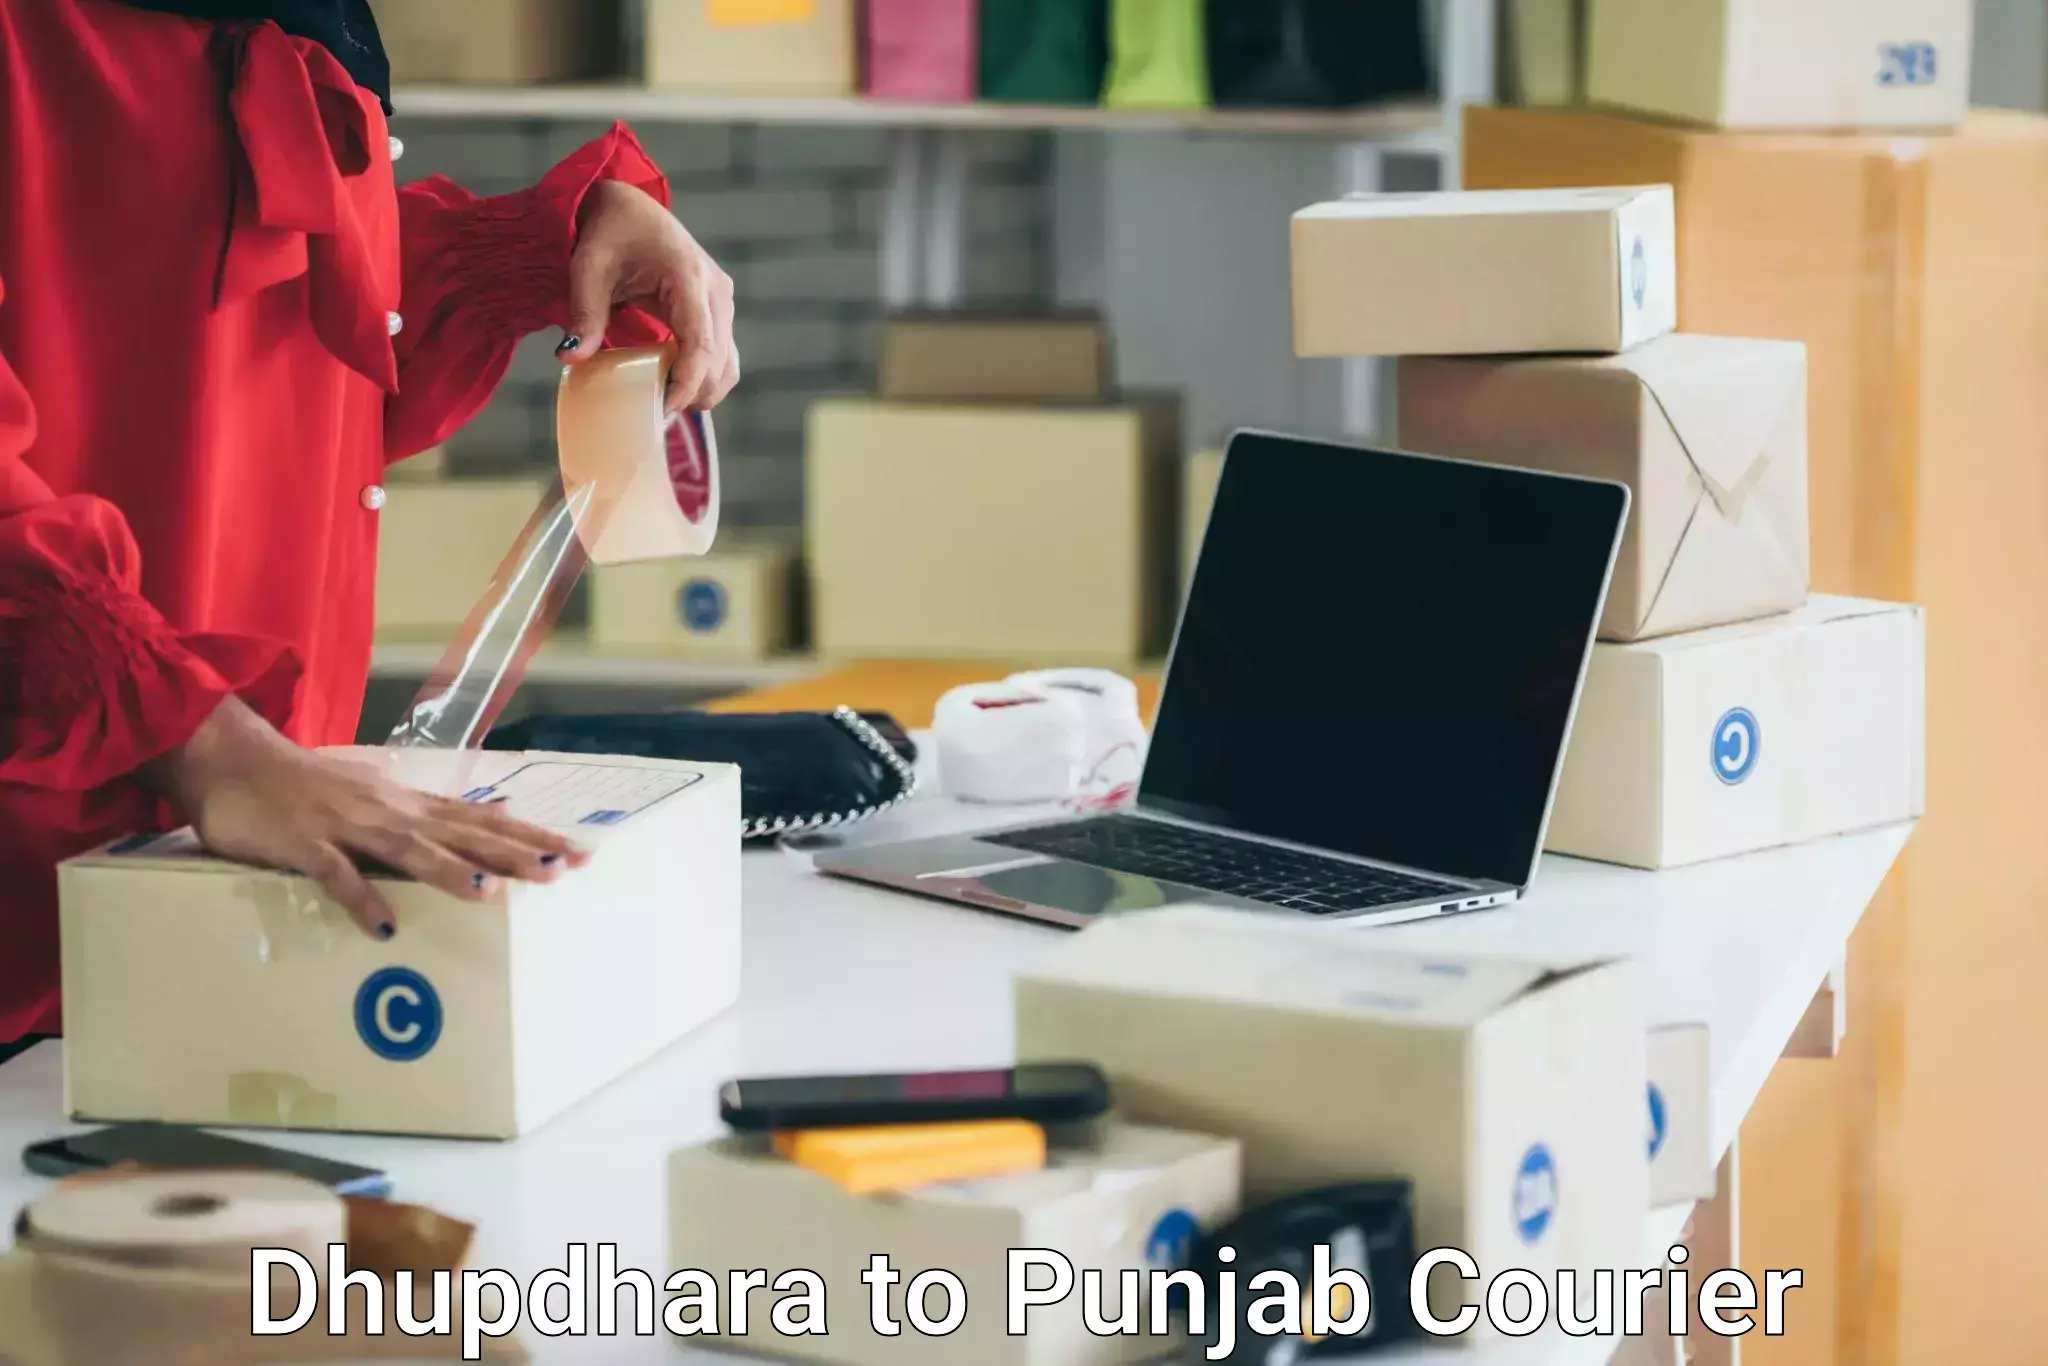 Smooth relocation services Dhupdhara to Central University of Punjab Bathinda